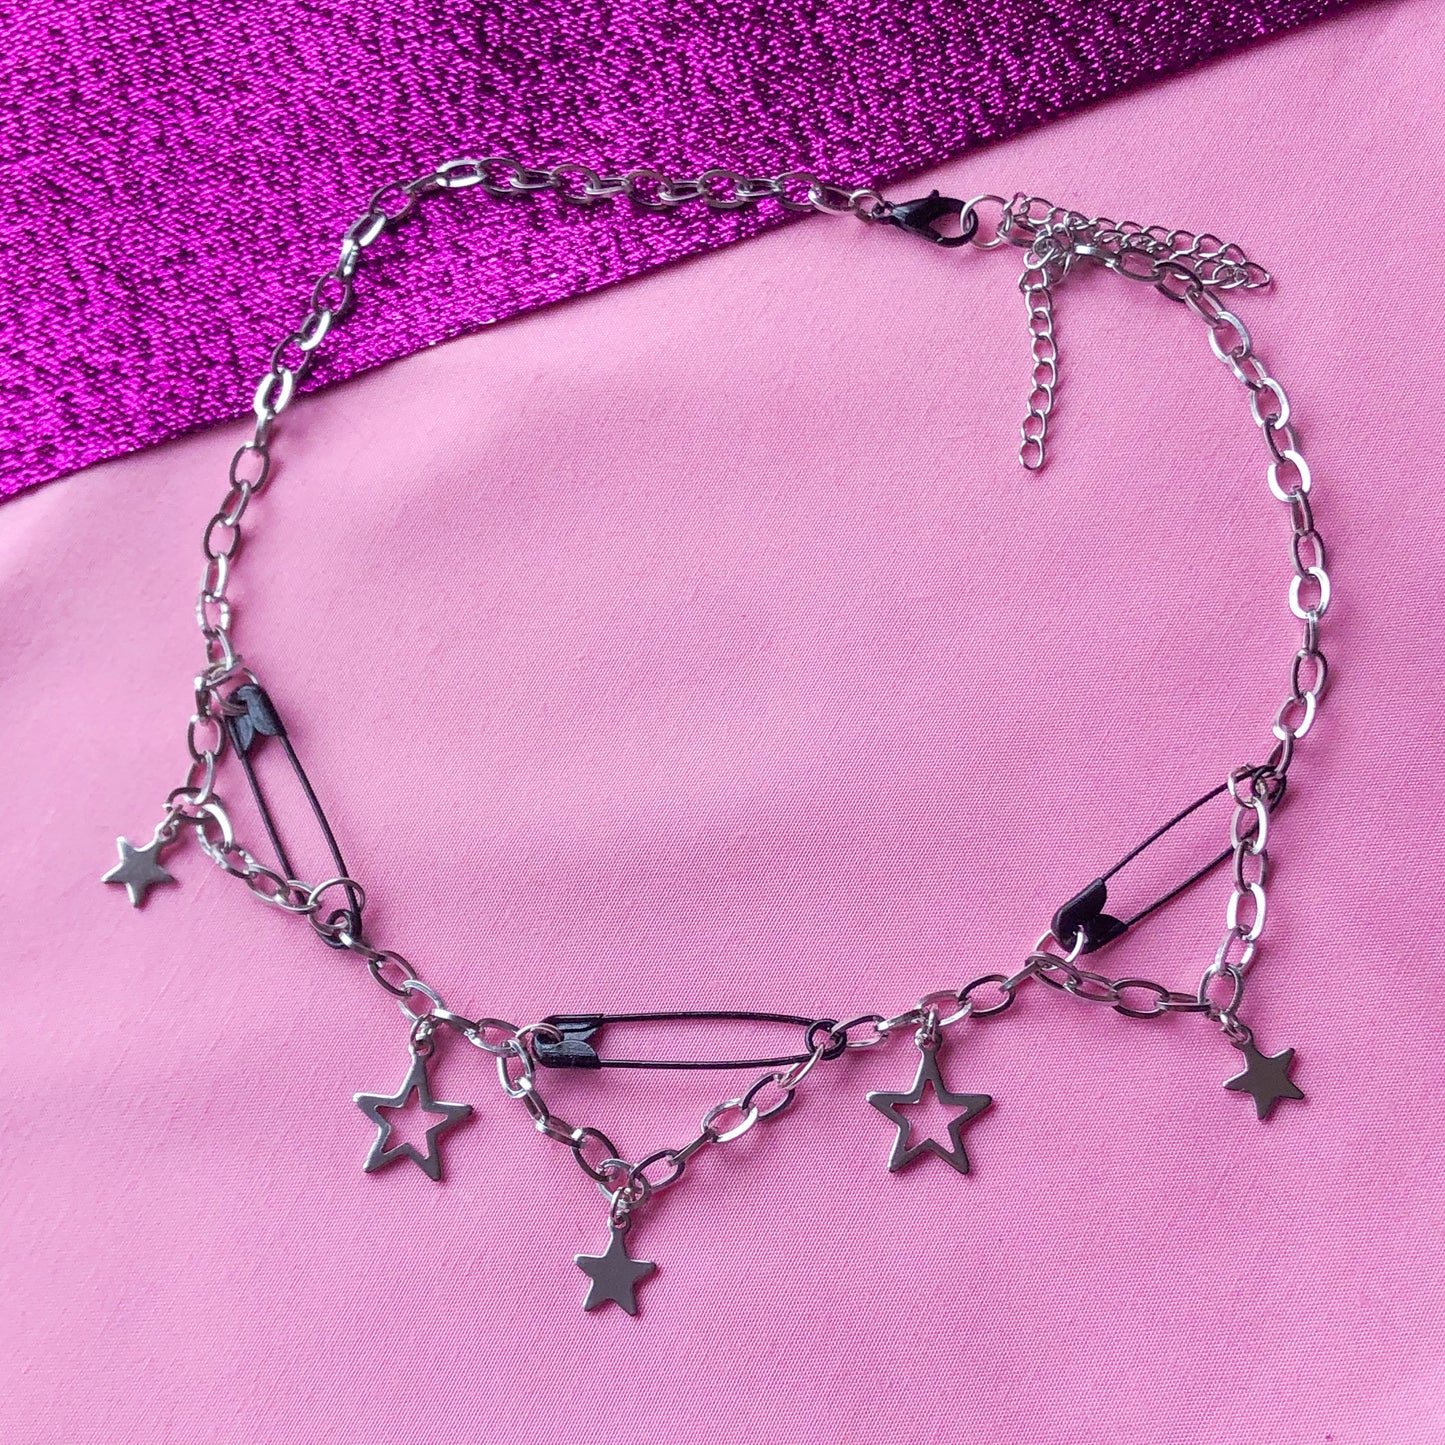 Black safety pin and star charm steel necklace